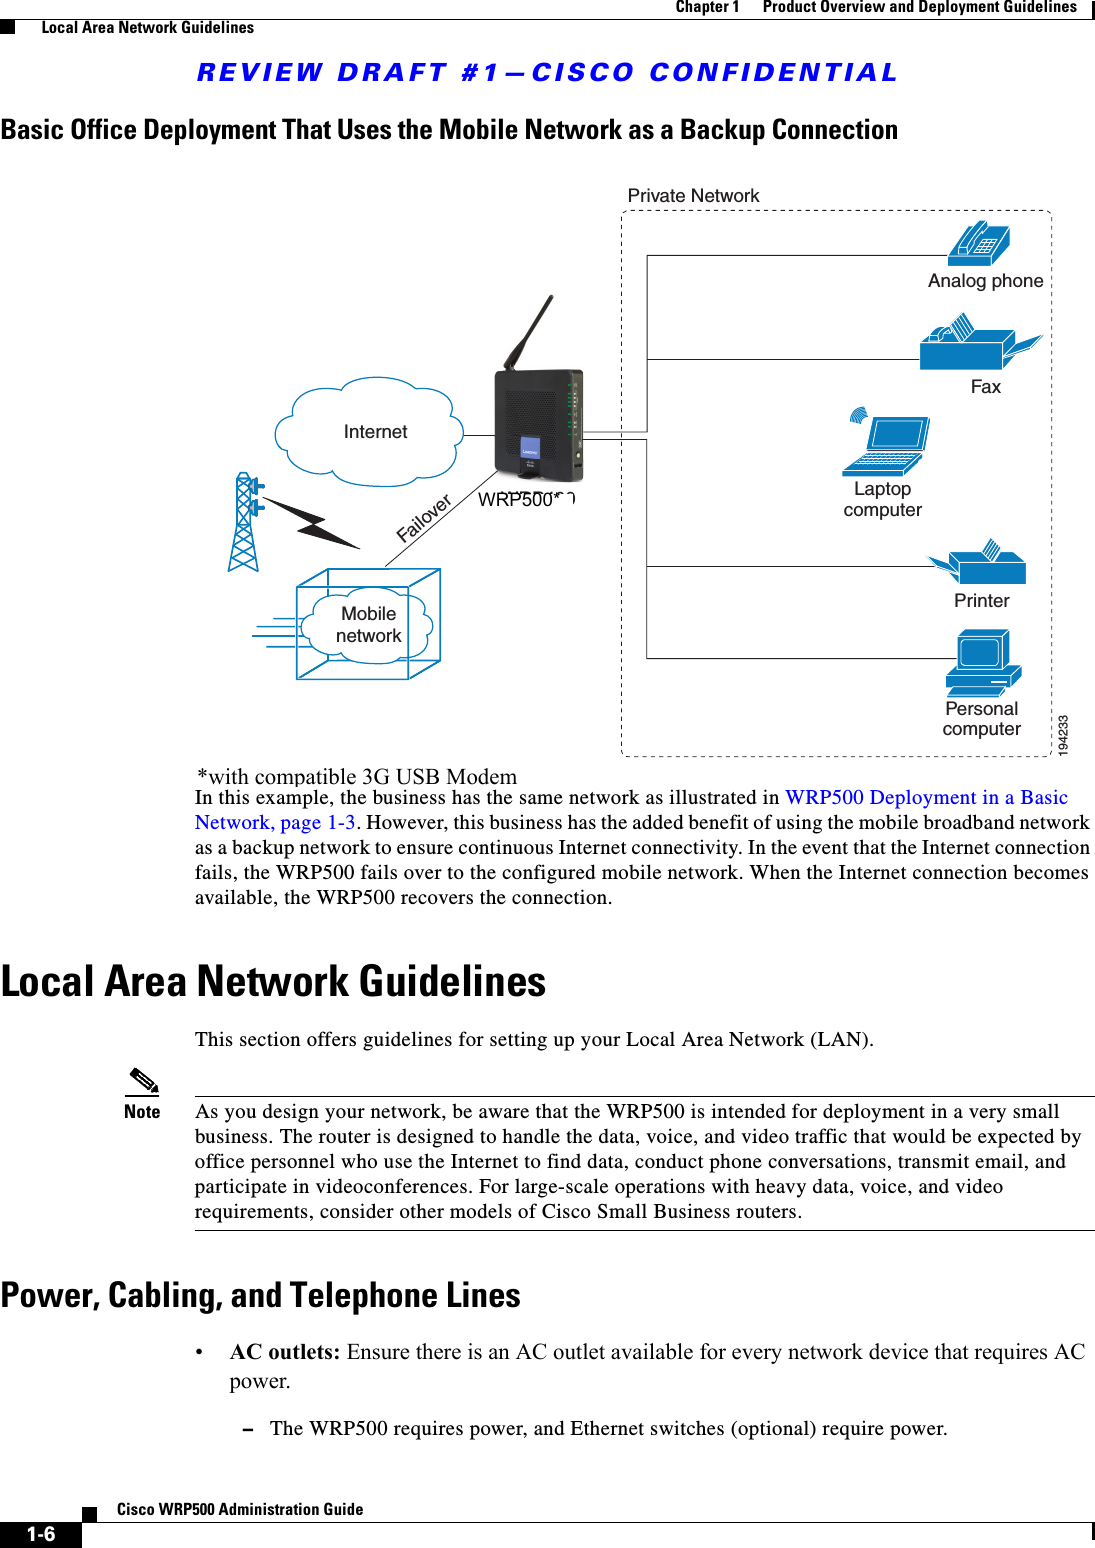 REVIEW DRAFT #1—CISCO CONFIDENTIAL1-6Cisco WRP500 Administration Guide Chapter 1      Product Overview and Deployment Guidelines  Local Area Network GuidelinesBasic Office Deployment That Uses the Mobile Network as a Backup ConnectionIn this example, the business has the same network as illustrated in WRP500 Deployment in a Basic Network, page 1-3. However, this business has the added benefit of using the mobile broadband network as a backup network to ensure continuous Internet connectivity. In the event that the Internet connection fails, the WRP500 fails over to the configured mobile network. When the Internet connection becomes available, the WRP500 recovers the connection.Local Area Network GuidelinesThis section offers guidelines for setting up your Local Area Network (LAN).Note As you design your network, be aware that the WRP500 is intended for deployment in a very small business. The router is designed to handle the data, voice, and video traffic that would be expected by office personnel who use the Internet to find data, conduct phone conversations, transmit email, and participate in videoconferences. For large-scale operations with heavy data, voice, and video requirements, consider other models of Cisco Small Business routers.Power, Cabling, and Telephone Lines•AC outlets: Ensure there is an AC outlet available for every network device that requires AC power. –The WRP500 requires power, and Ethernet switches (optional) require power.PersonalcomputerWRP400 LaptopcomputerAnalog phoneFaxPrinterPrivate NetworkInternet1942331MobilenetworkFailover*with compatible 3G USB ModemWRP500*